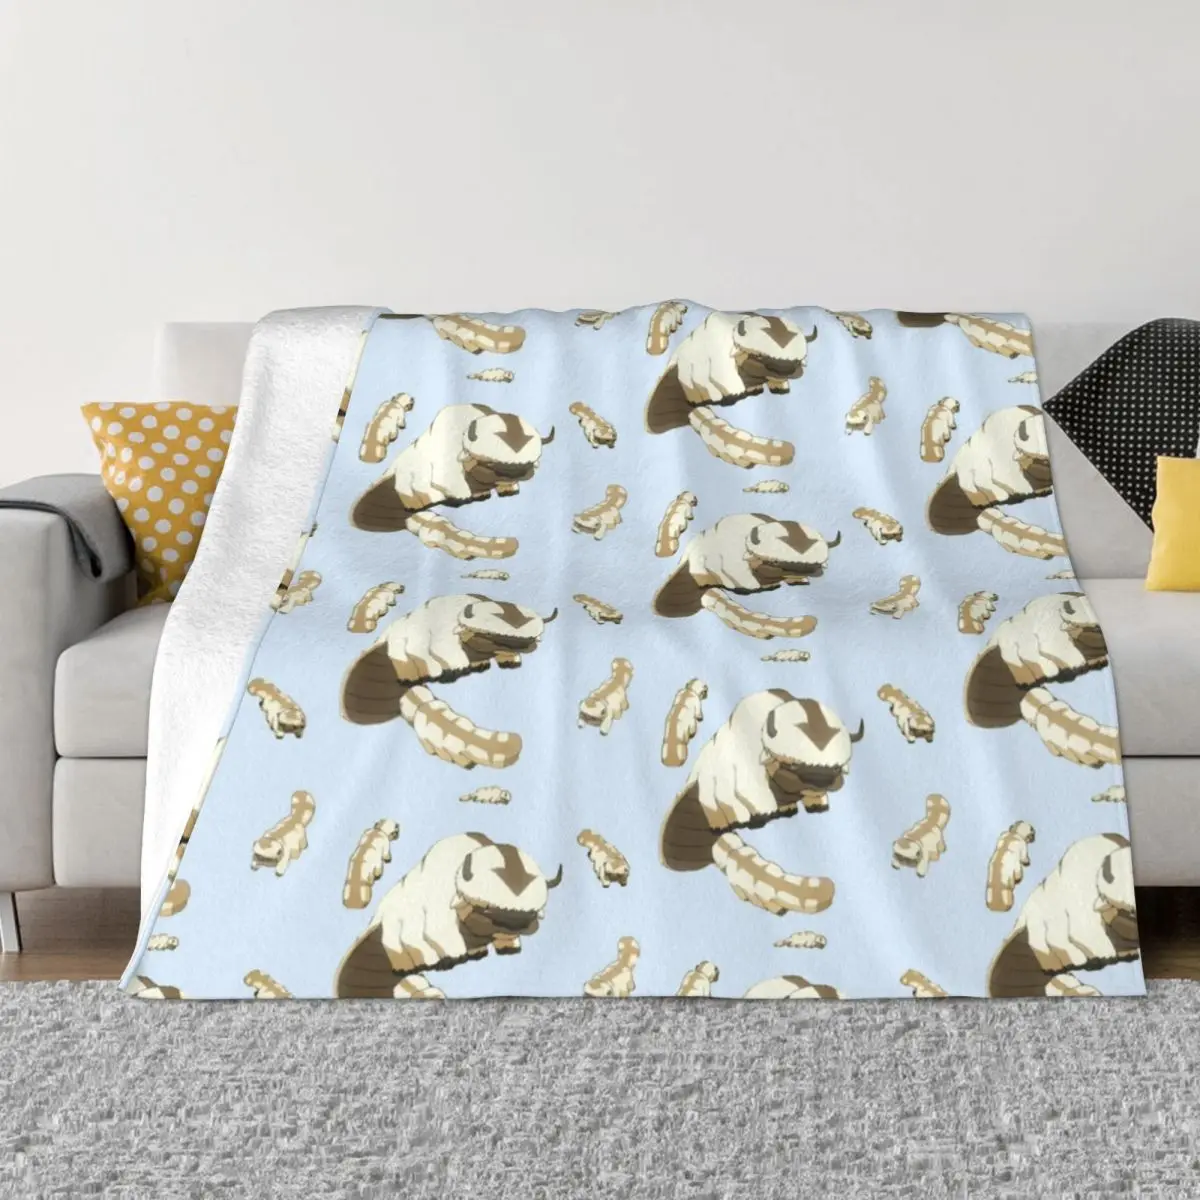 

Avatar The Last Airbender Anime Appa And Baby Blankets Flannel All Season Ultra-Soft Throw Blankets for Bed Travel Bedspread